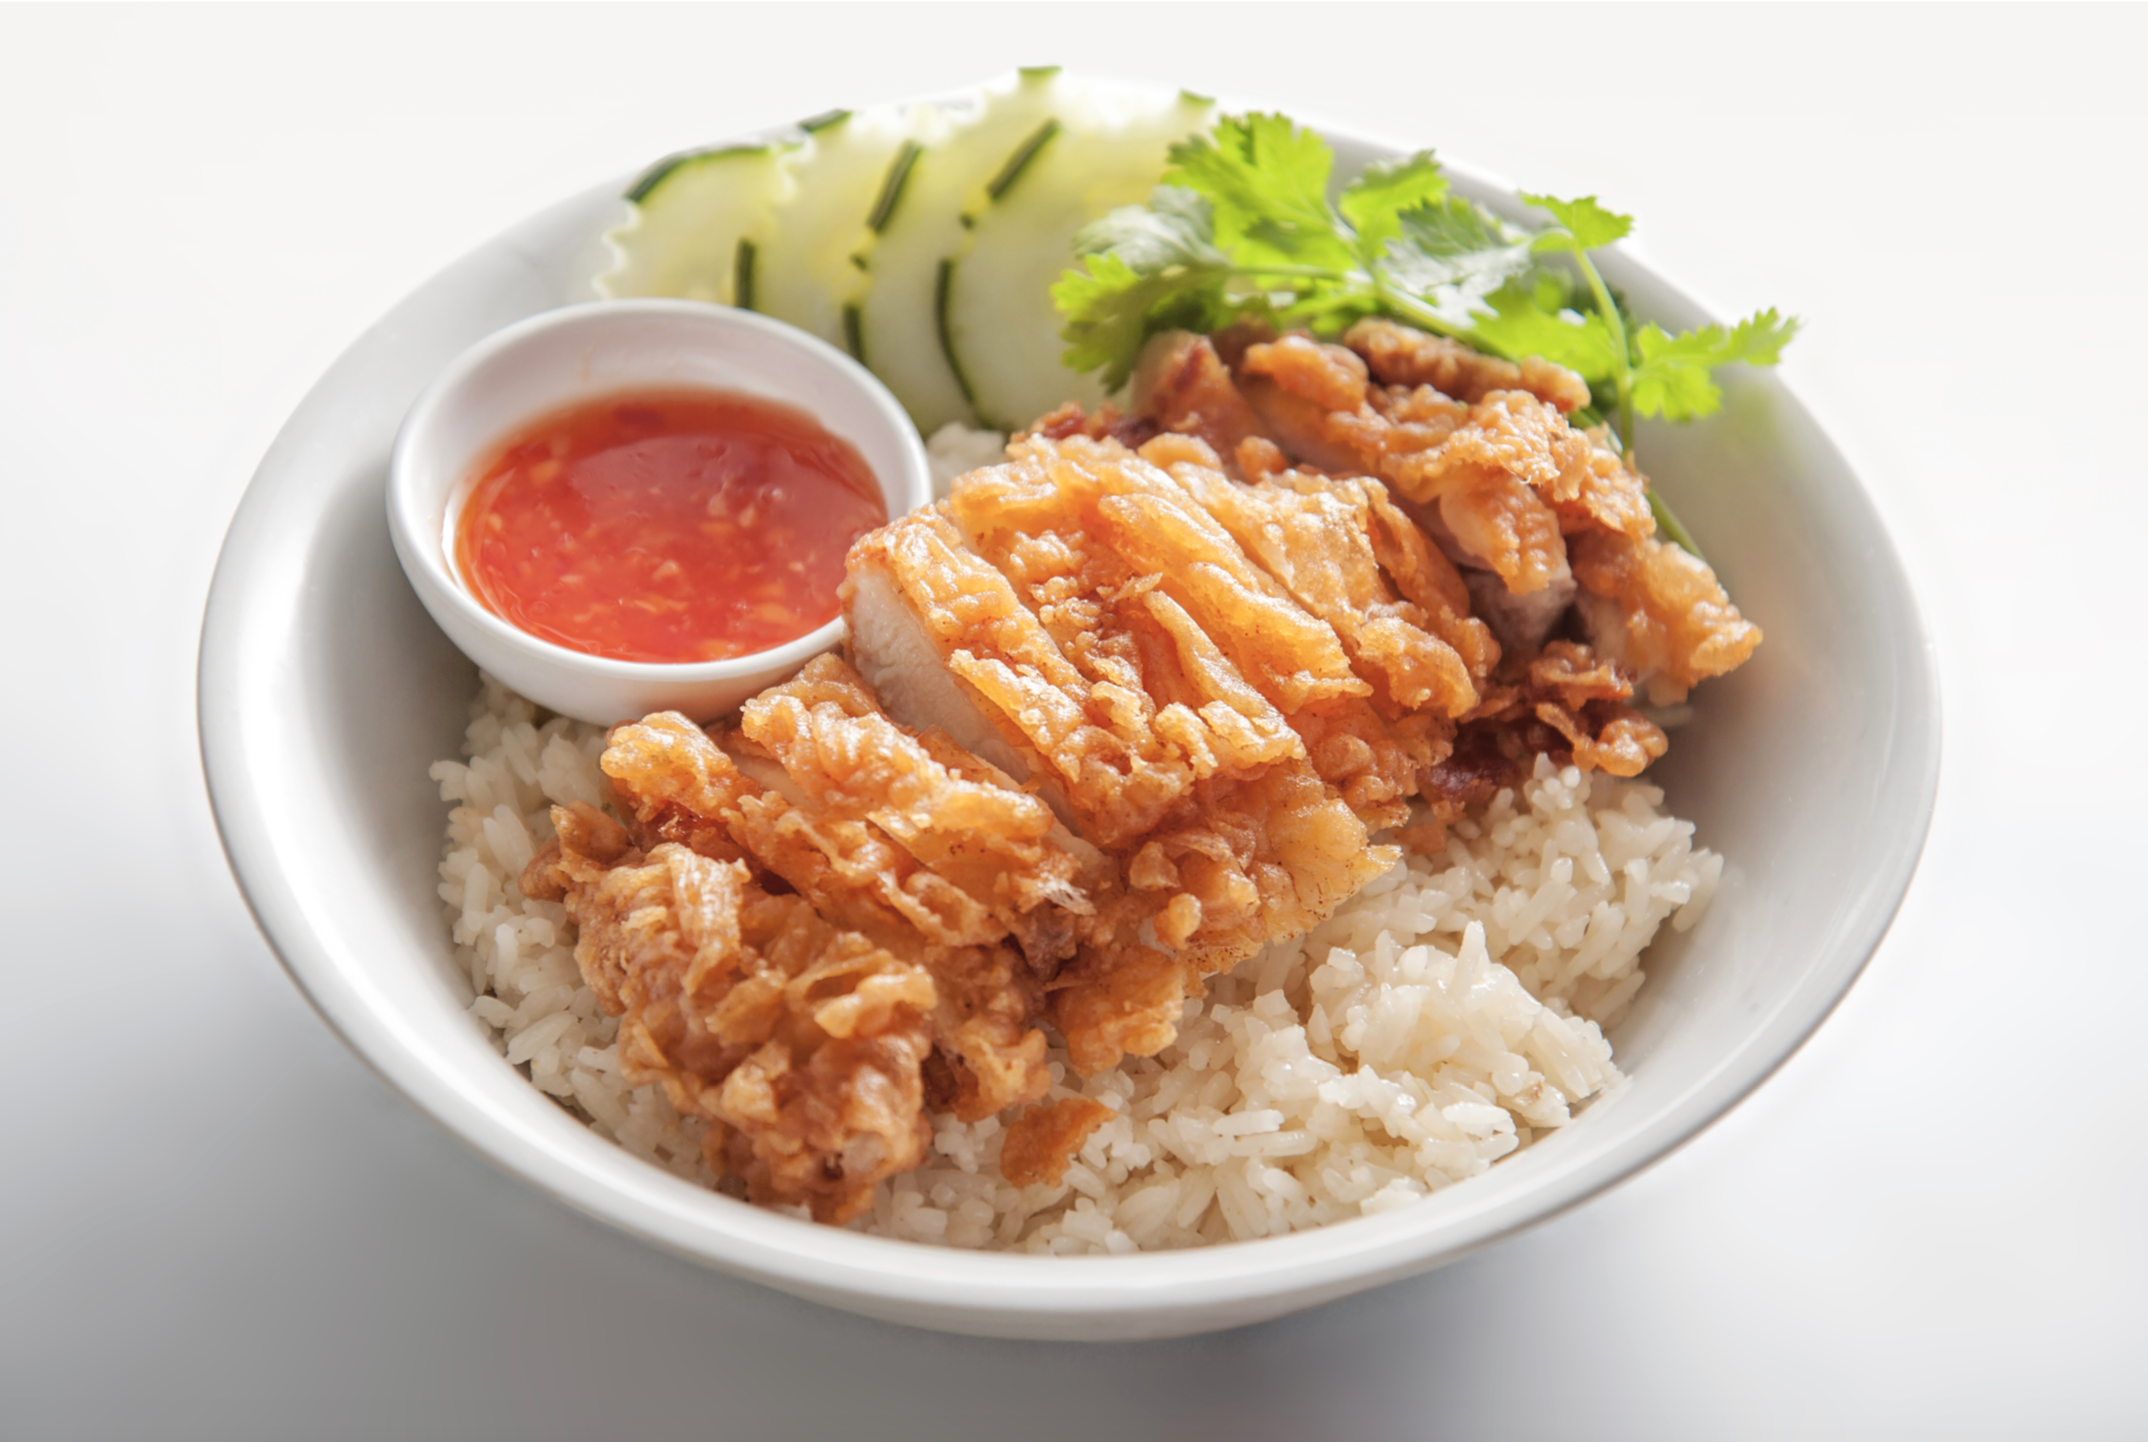 A bowl of light-colored fried chicken rests atop rice next to cucumber, greens, and a side of red chili sauce